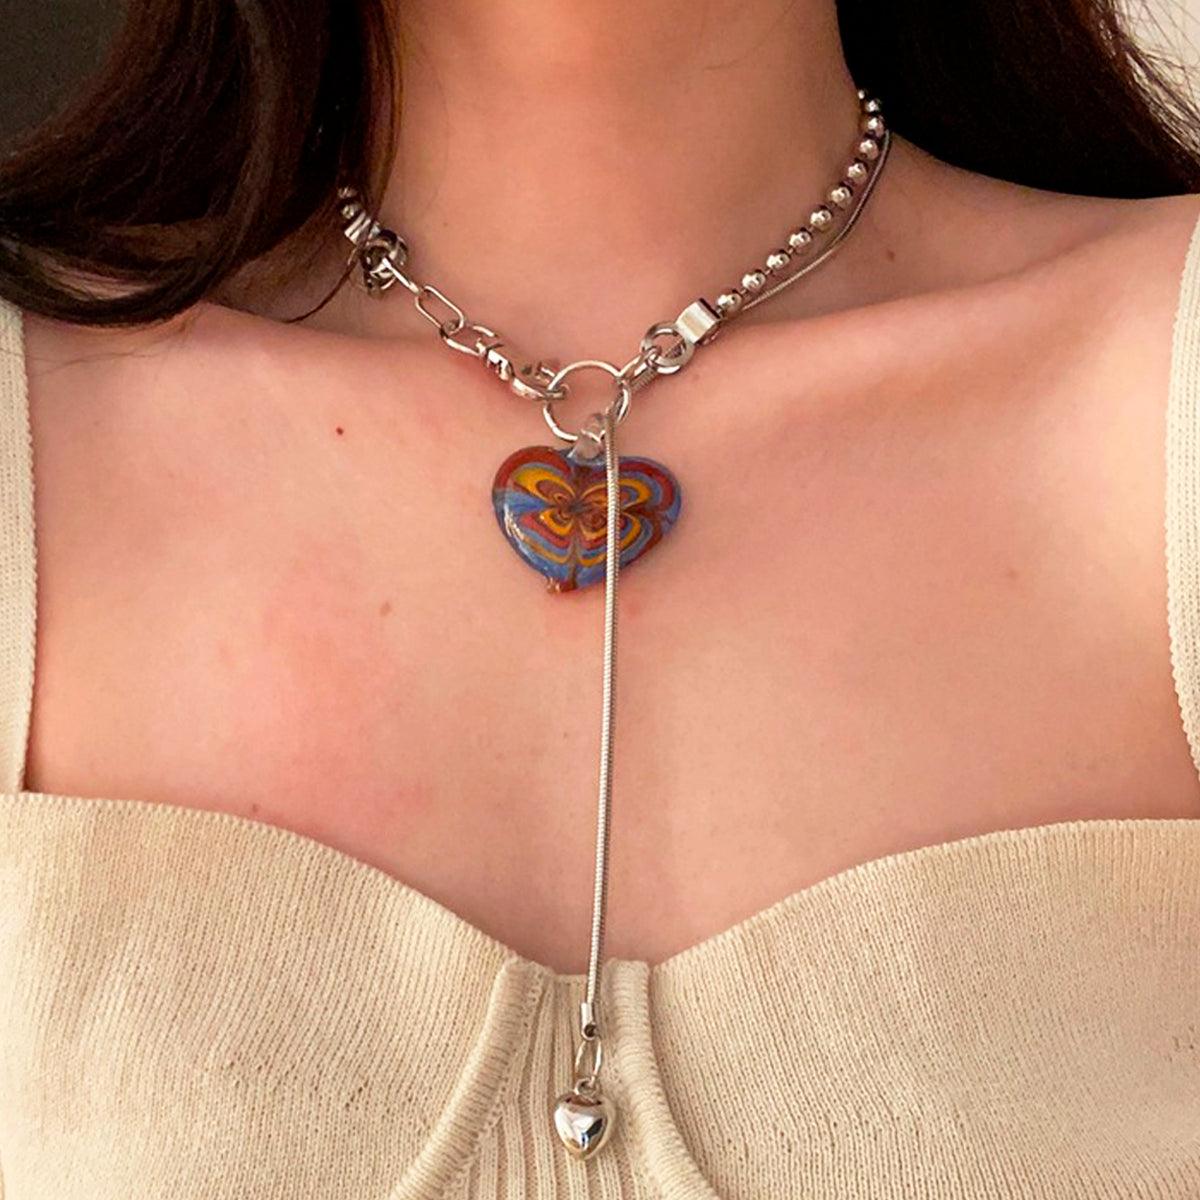 Indie Heart Chain Necklace - Aesthetic Clothes Shop